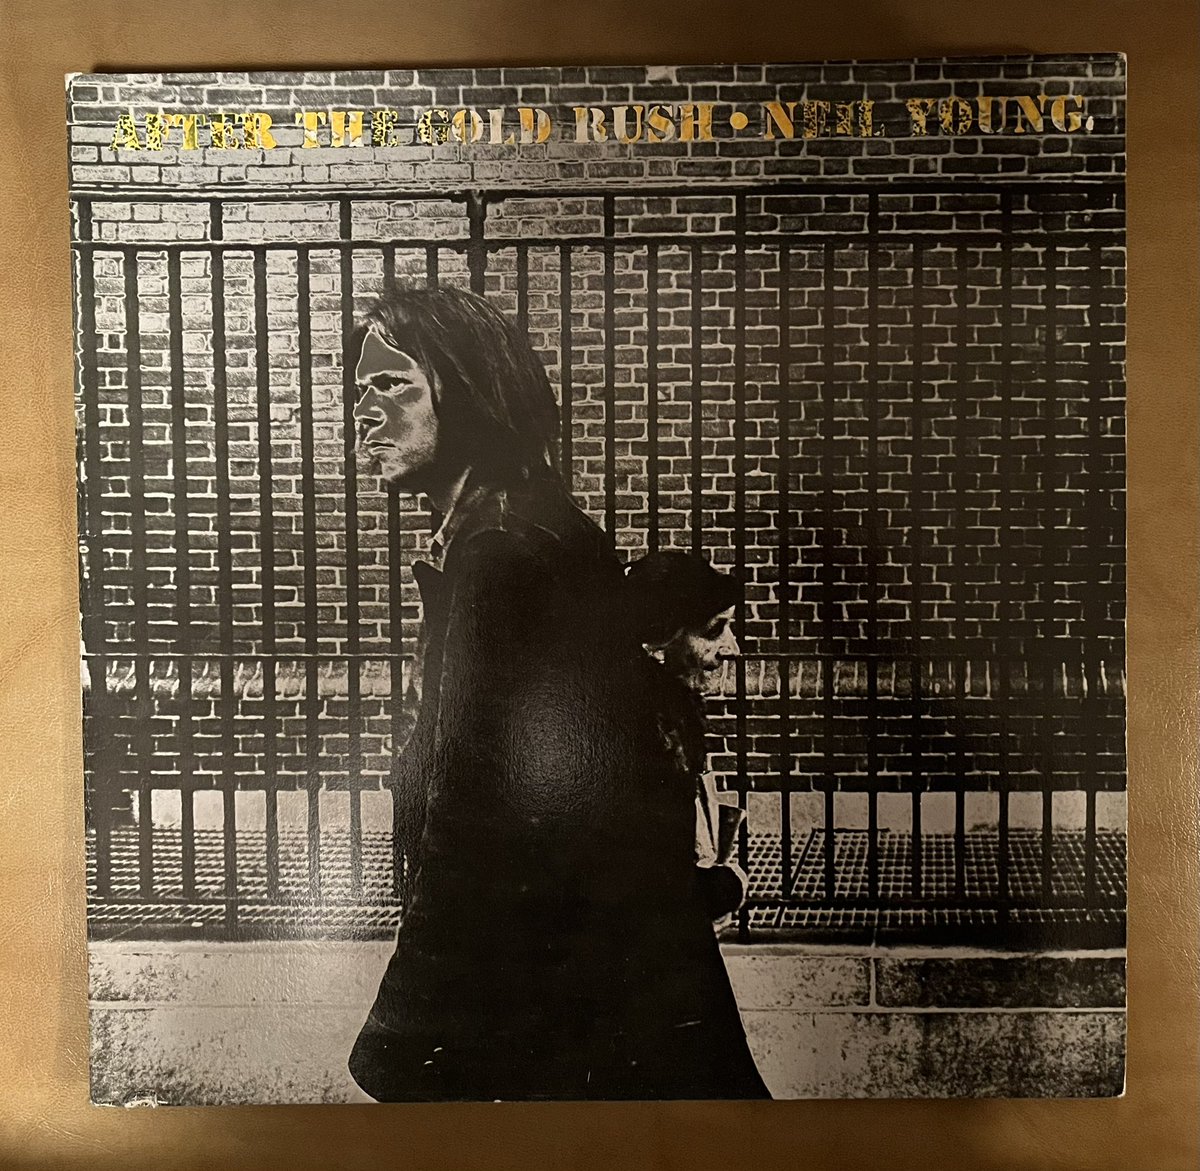 “After the Gold Rush” is the first Neil Young album I purchased in 1970. It remains one of his most classic of albums to this day.
#NeilYoung #AfterTheGoldRush #music #musicians #VinylLPs #albums